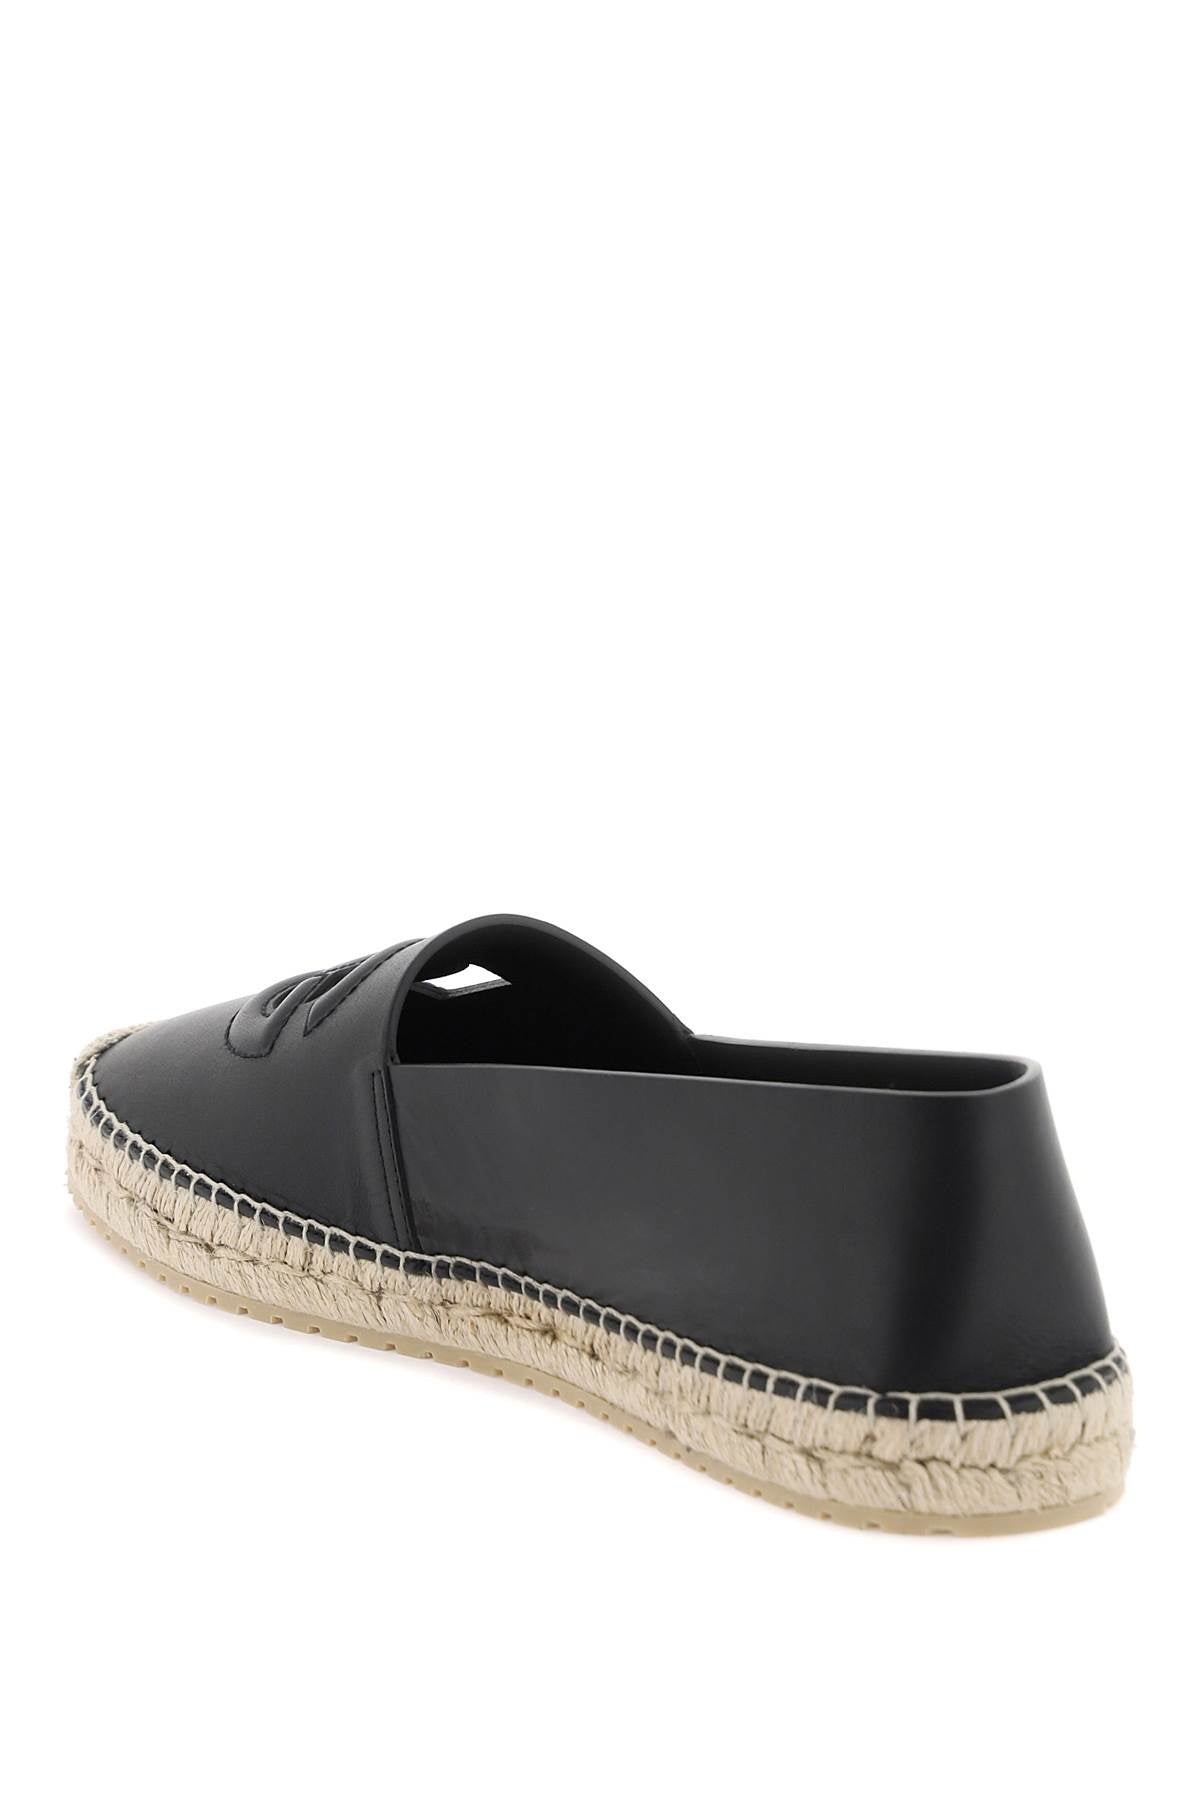 Dolce & Gabbana Leather Espadrilles With Dg Logo And Men - 3